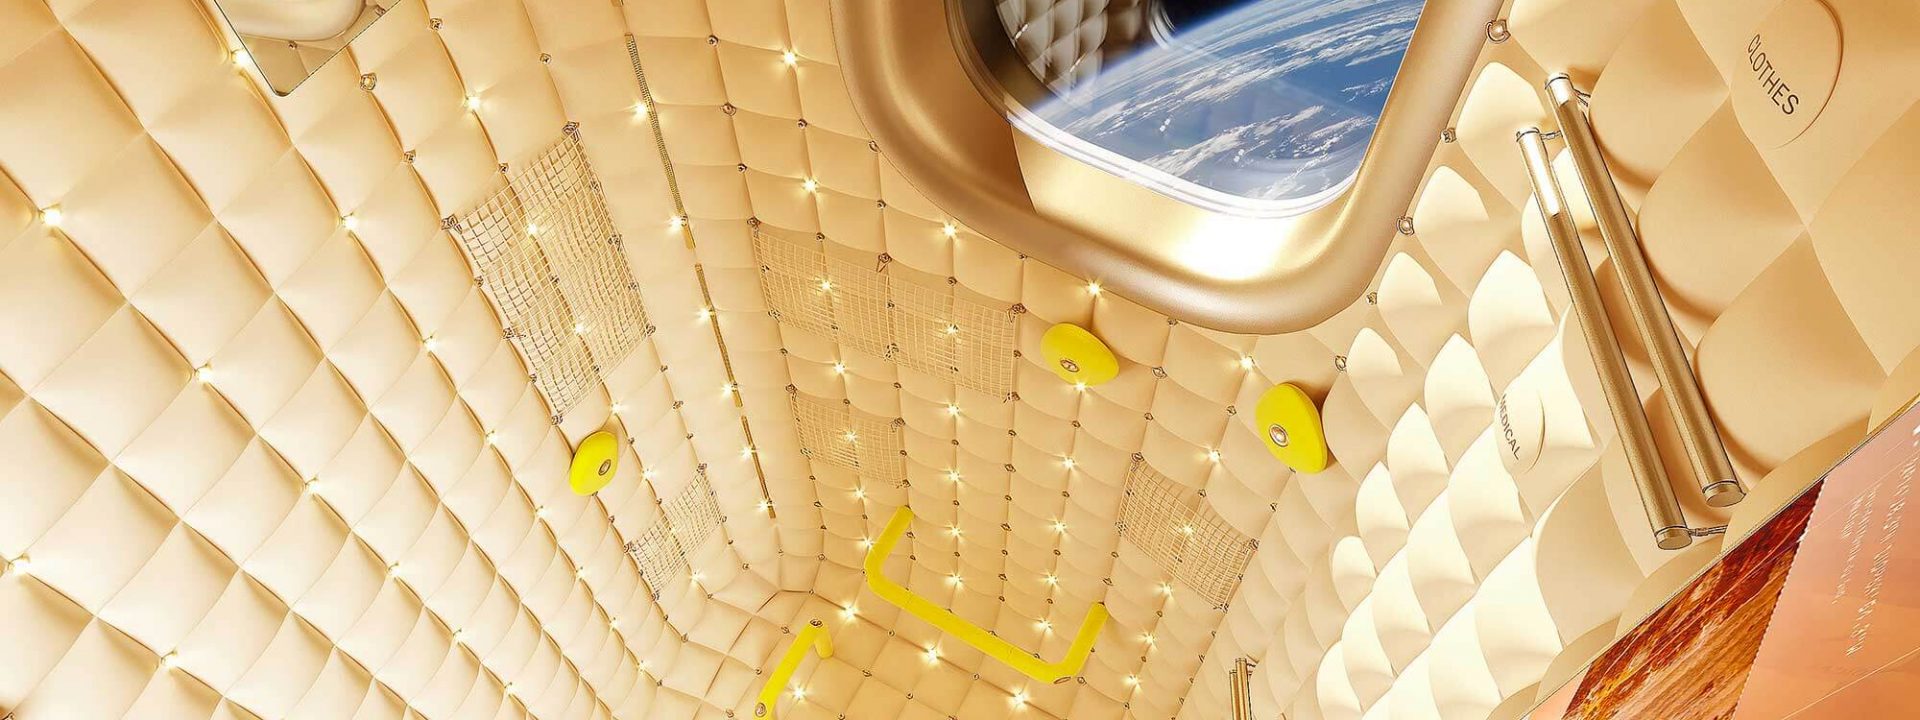 Hotels in space: Philippe Starck designs hotel room for cosmic-minded tourists